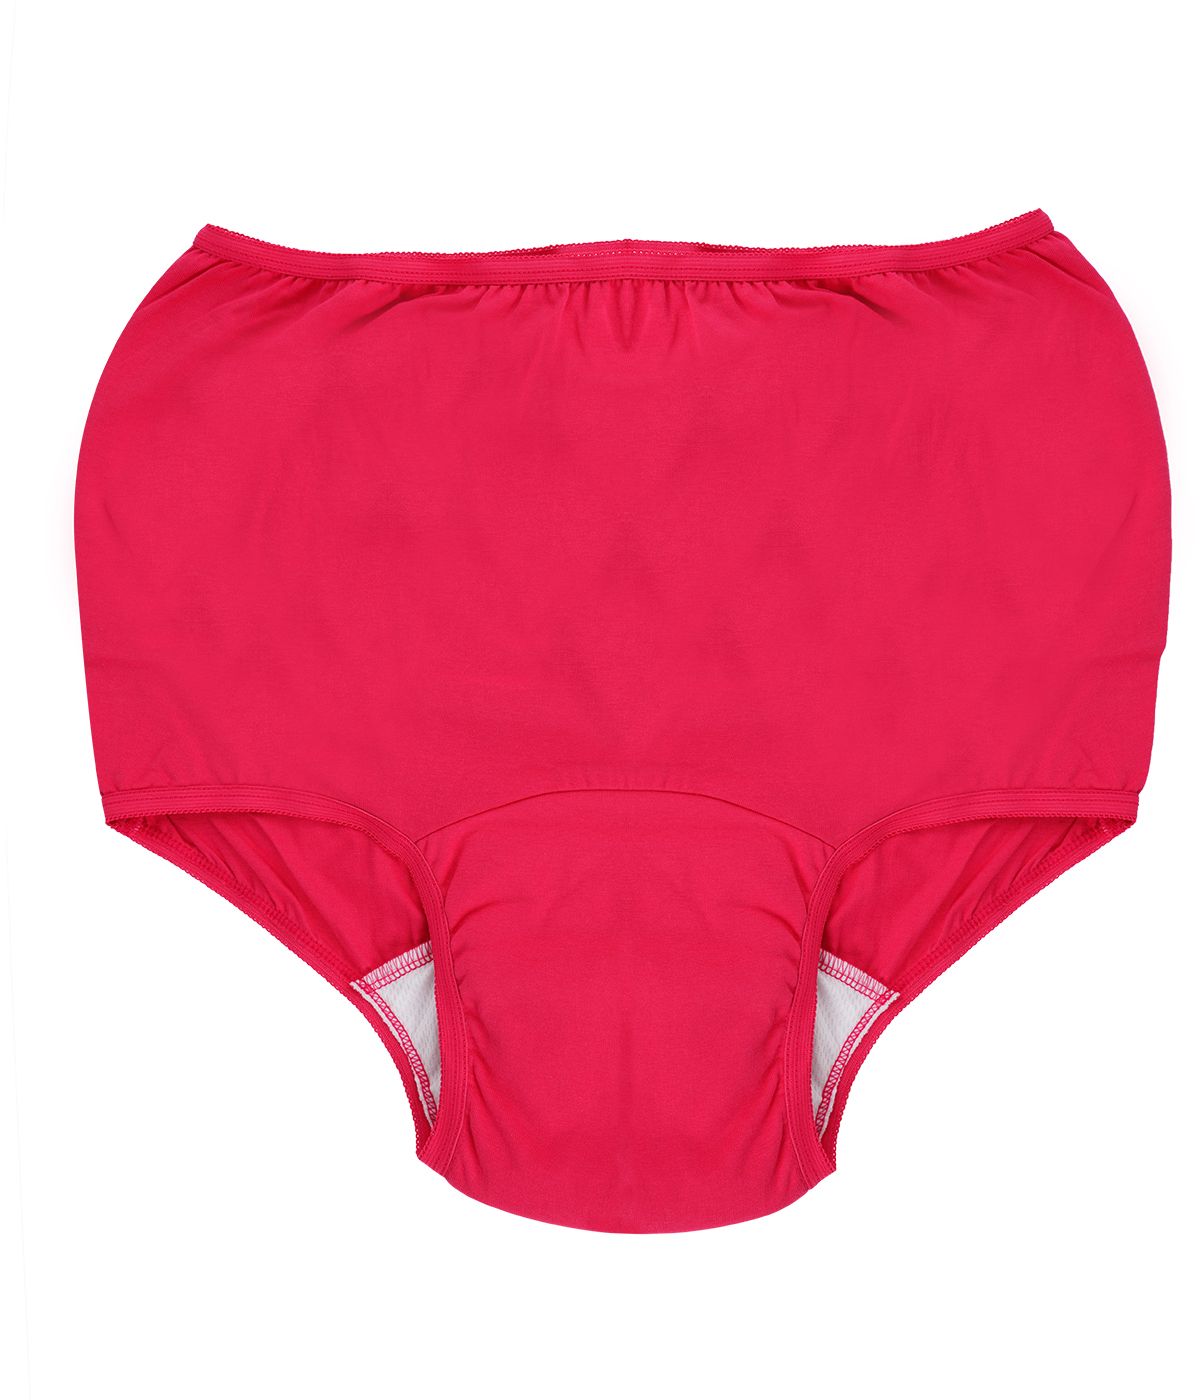 Anti Bacterial Cotton Underwear For Incontinence Females With Non